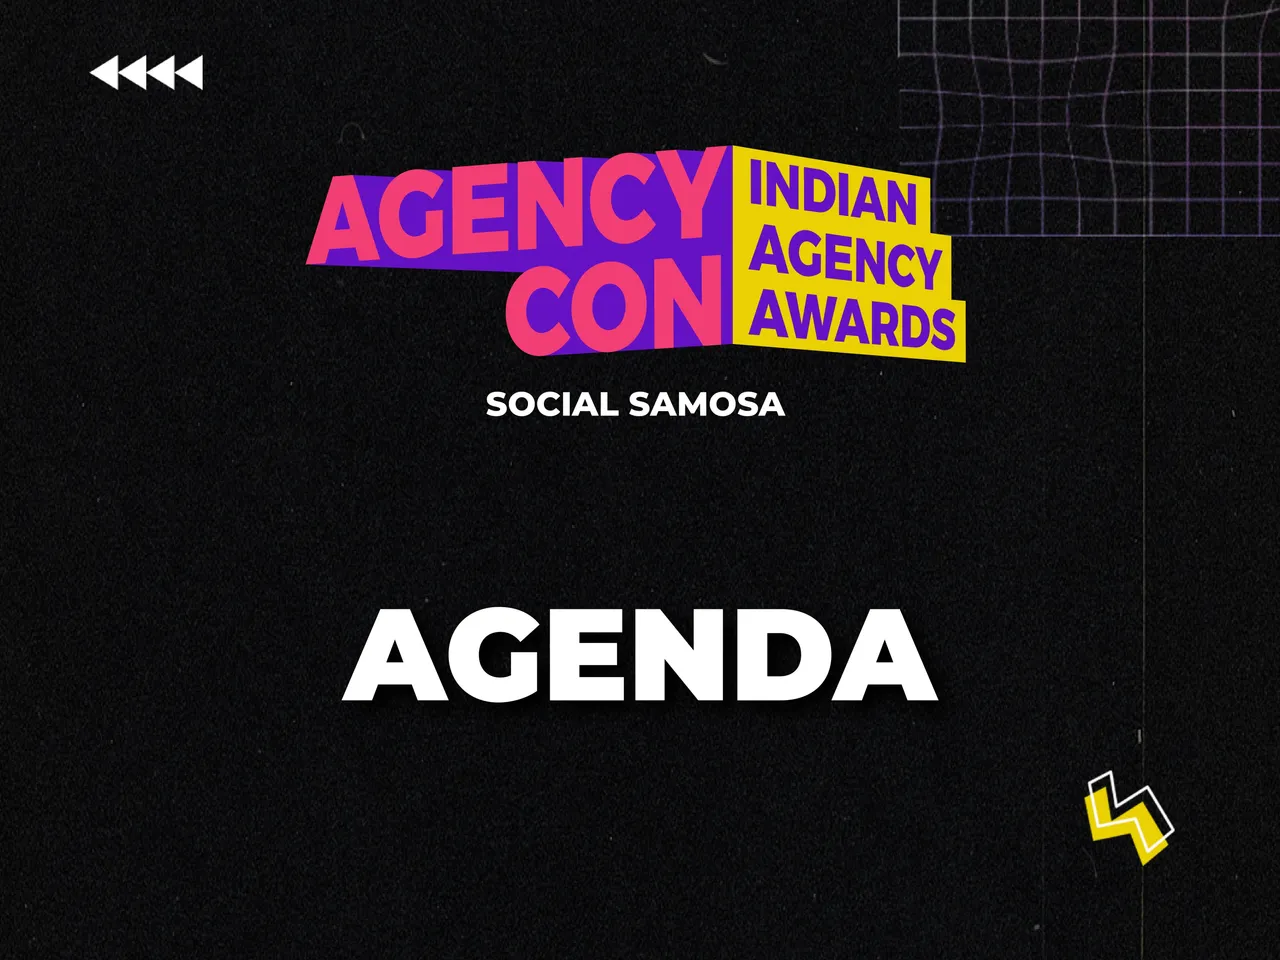 AgencyCon Agenda: All you need to know about the thought-leading sessions